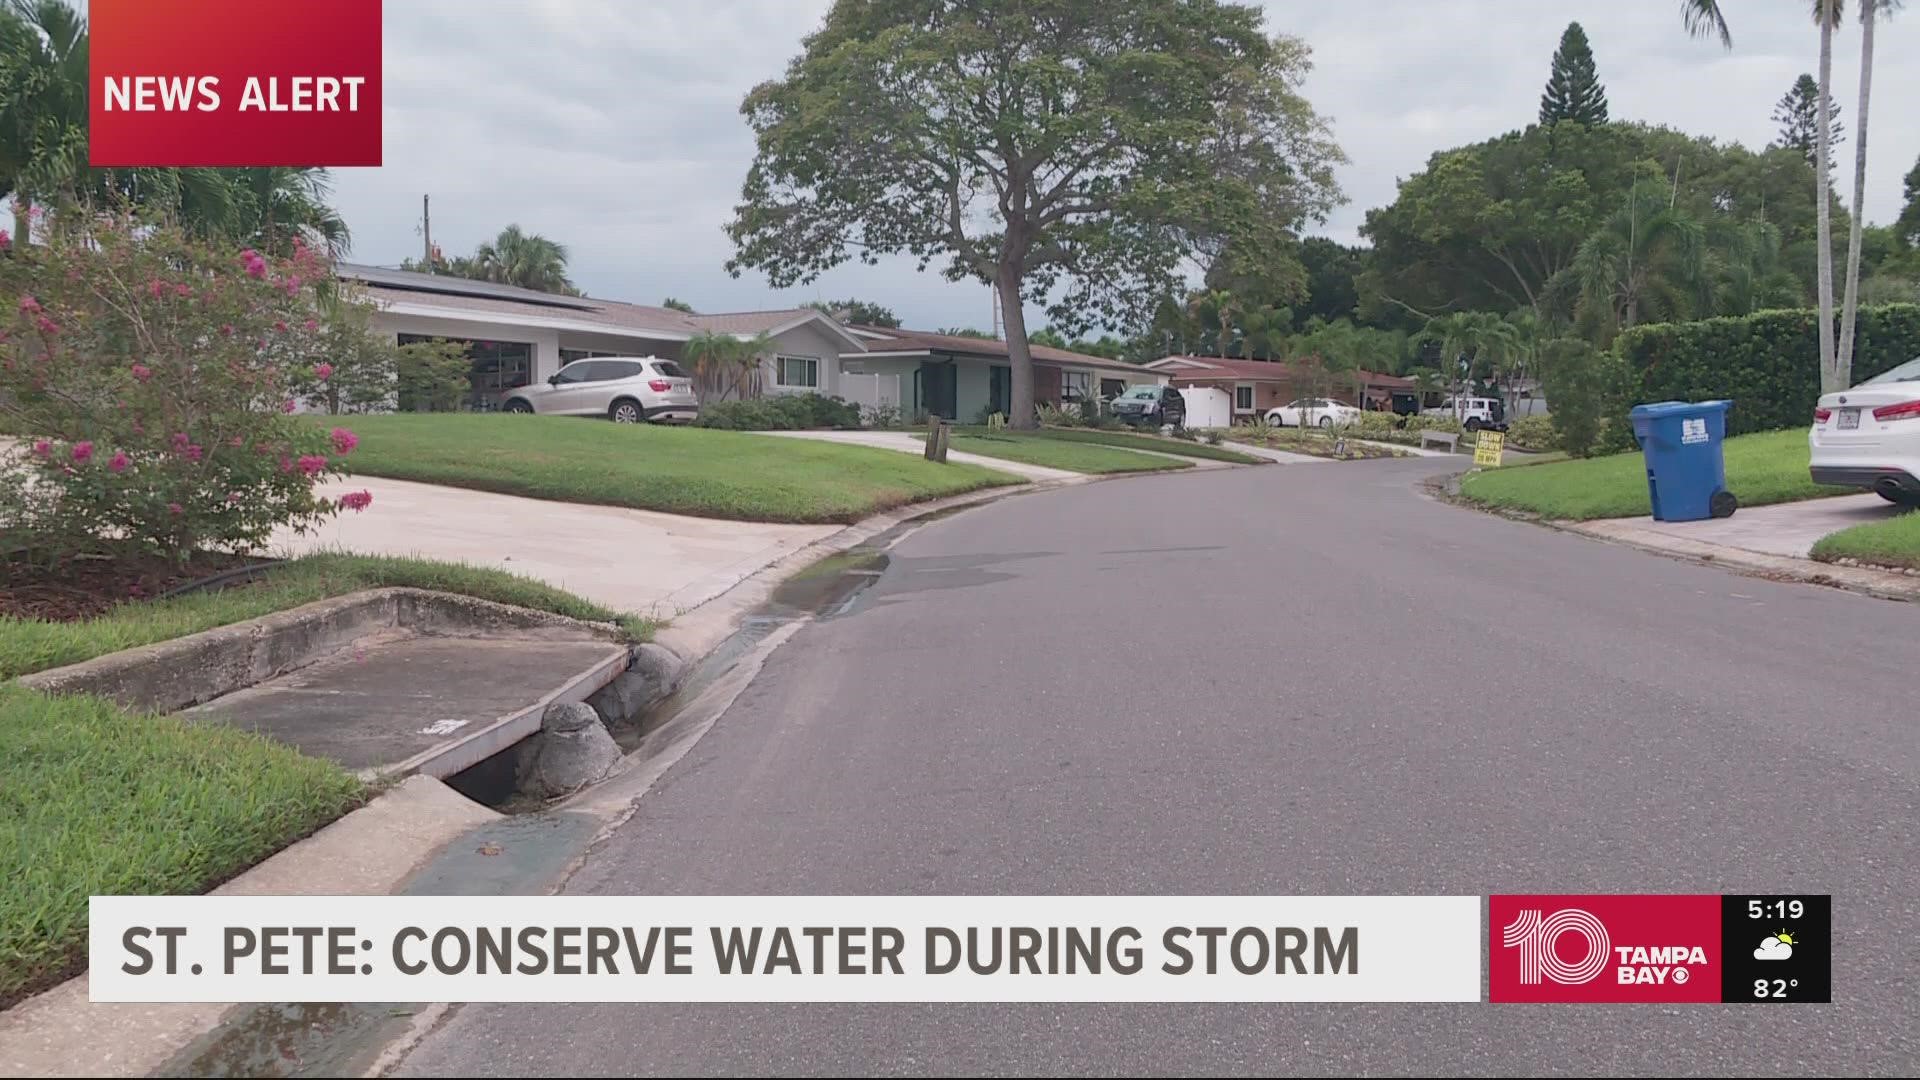 Pinellas and Hillsborough counties have had issues with sewage overflows in previous storms.